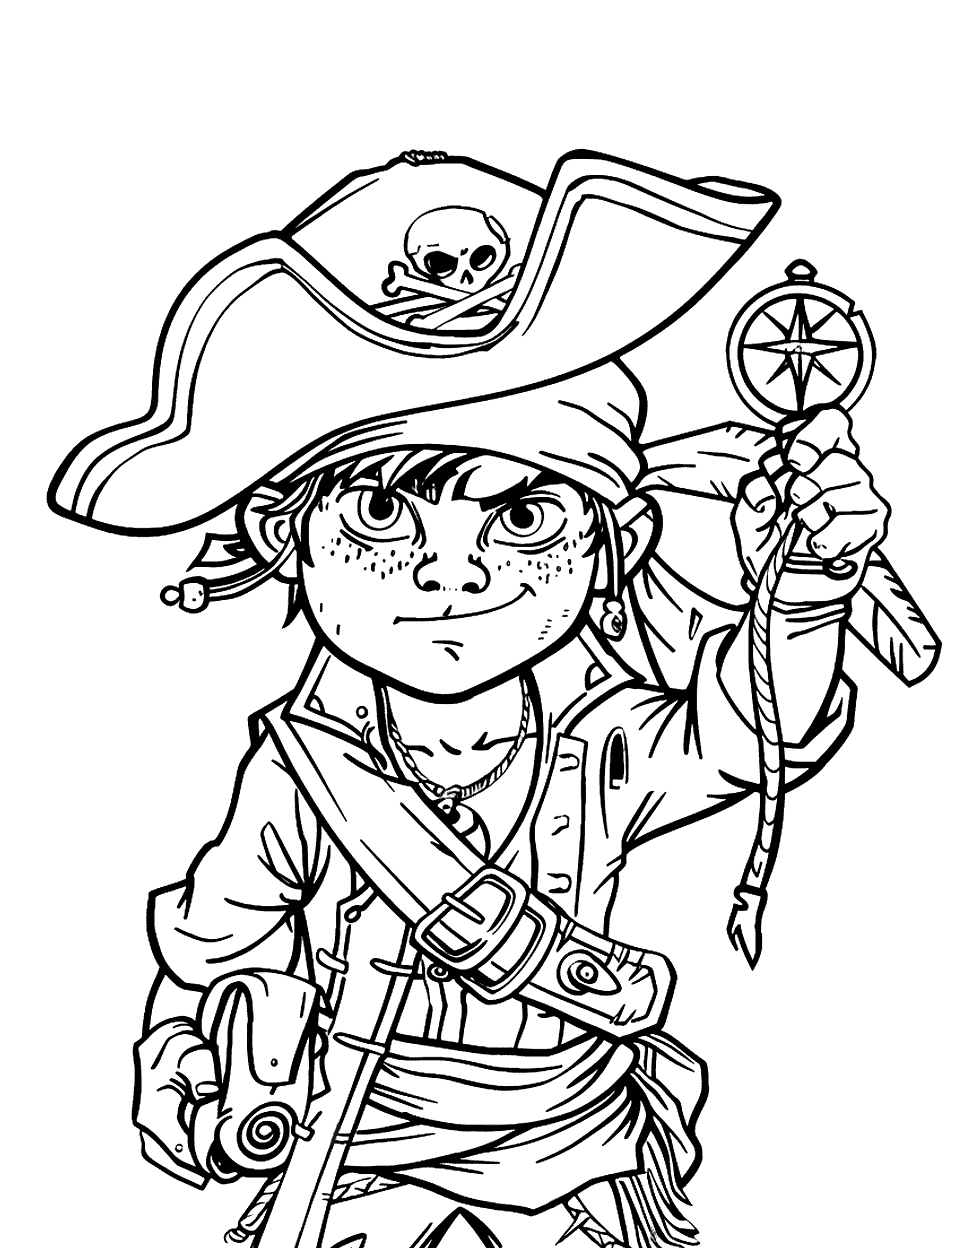 Boy Pirate and His Compass Coloring Page - A young pirate boy holding a compass.